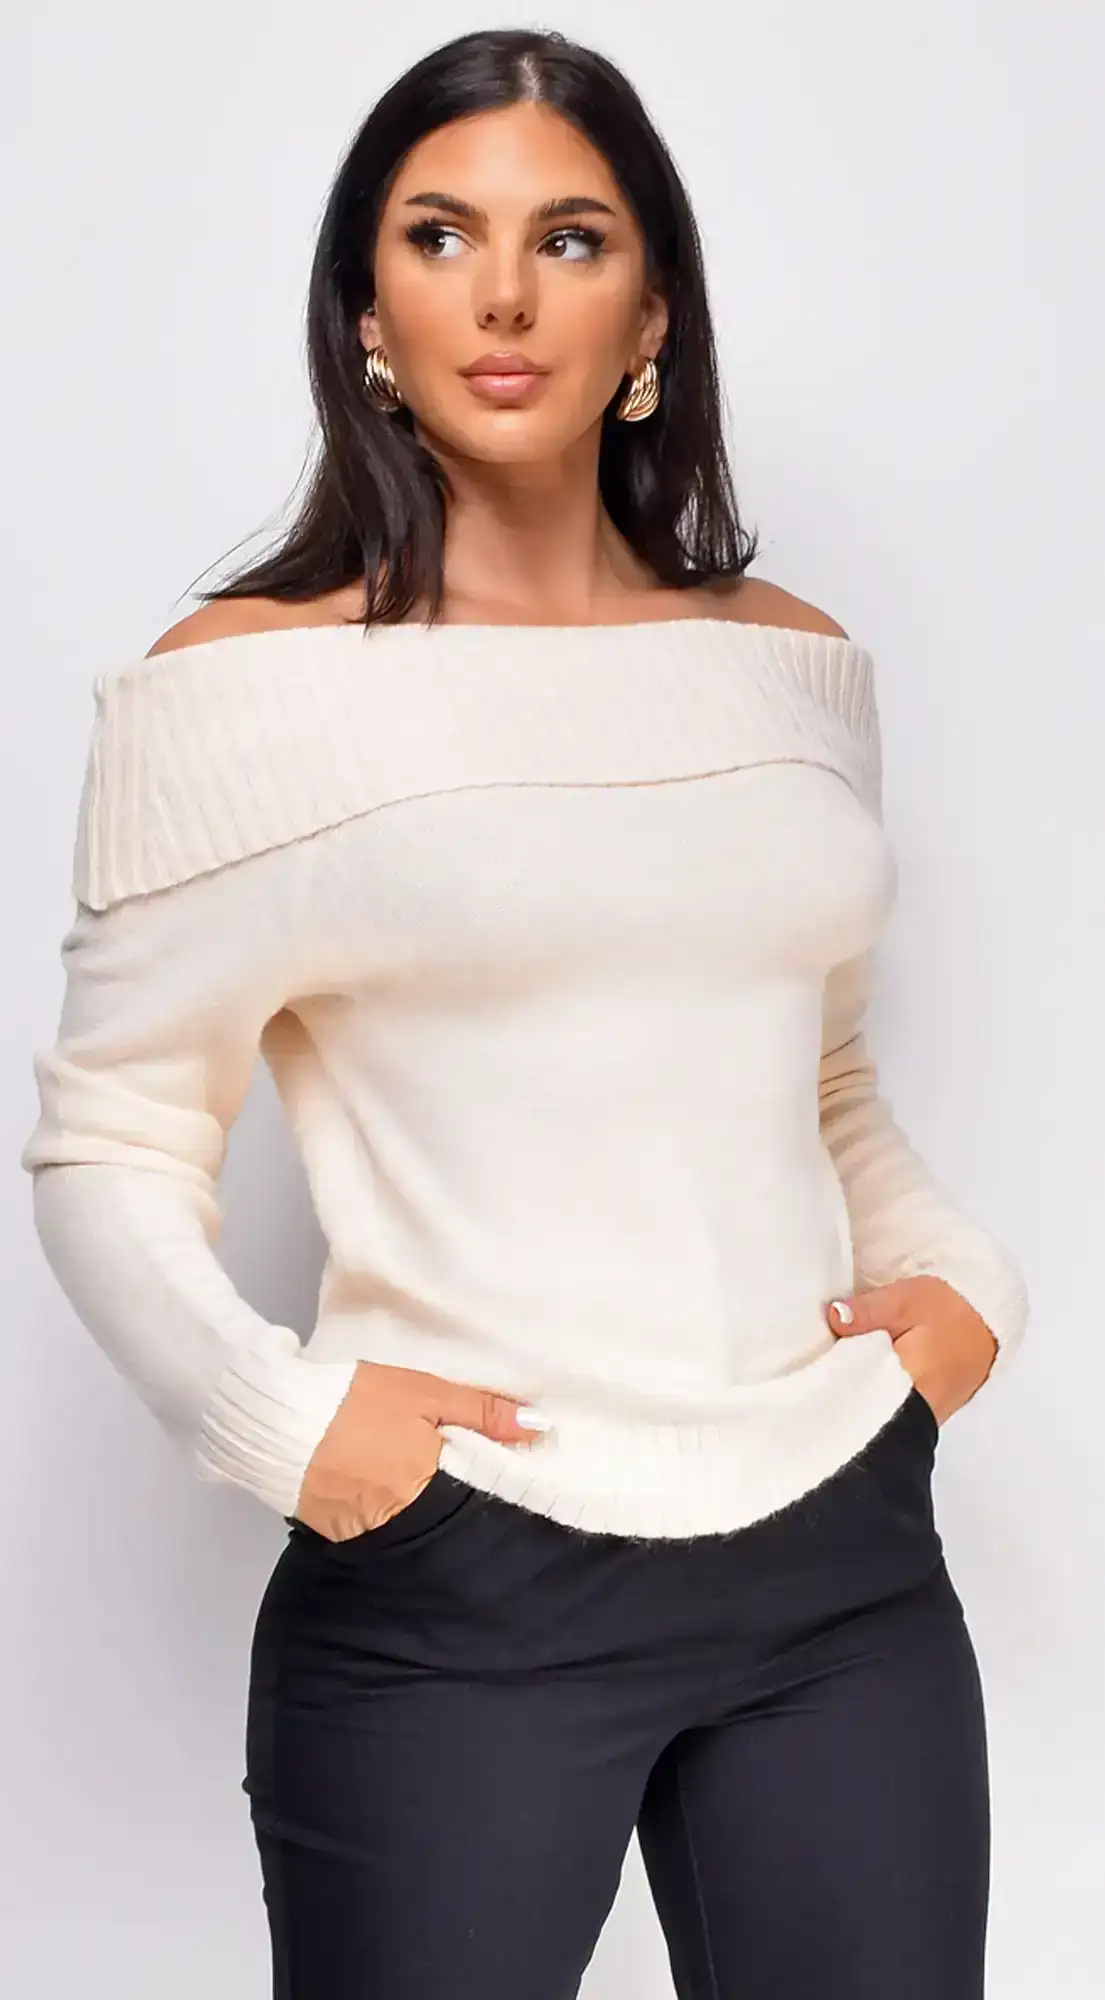 Image of Anavila Cream White Off Shoulder Long Sleeve Sweater Top